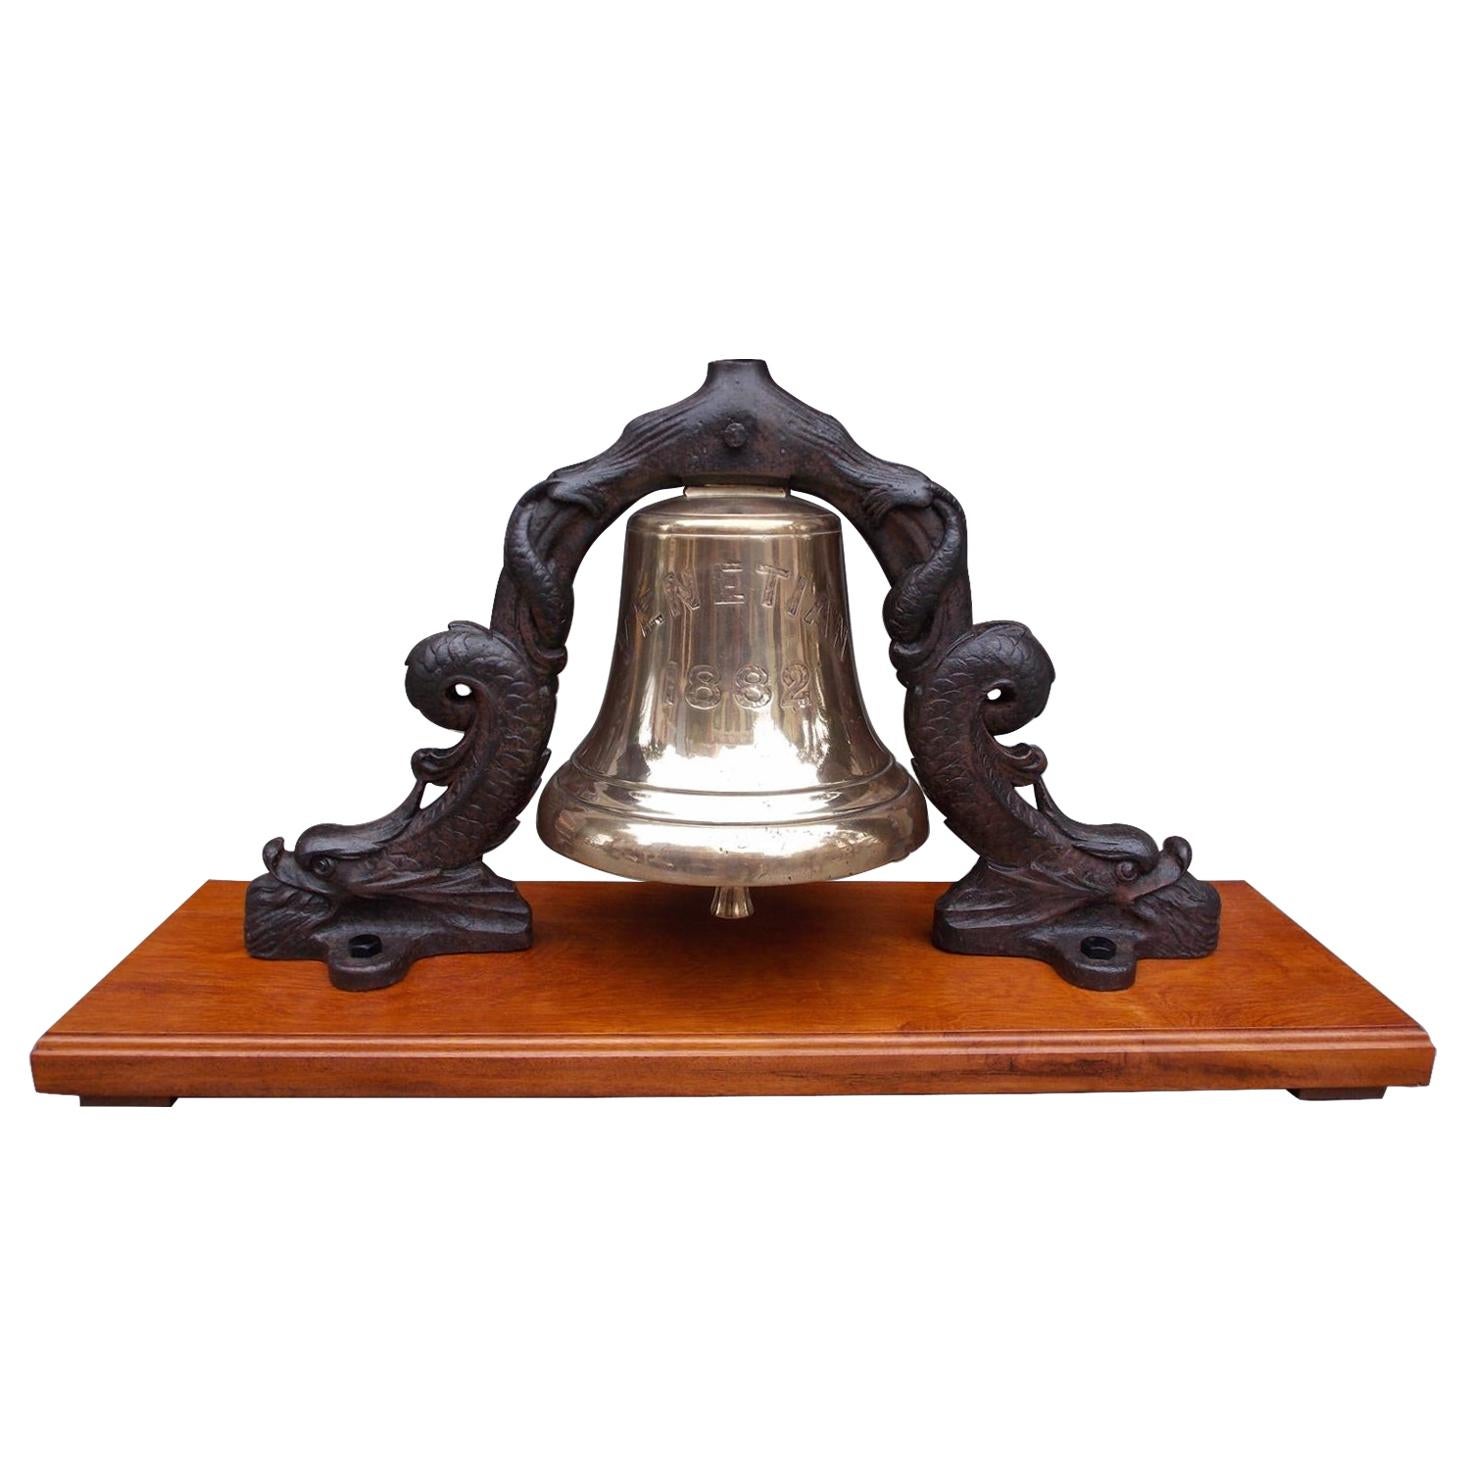 English Solid Brass Ship's Bell Mounted on Dolphin Yoke, “S.S. Venetian” C. 1882